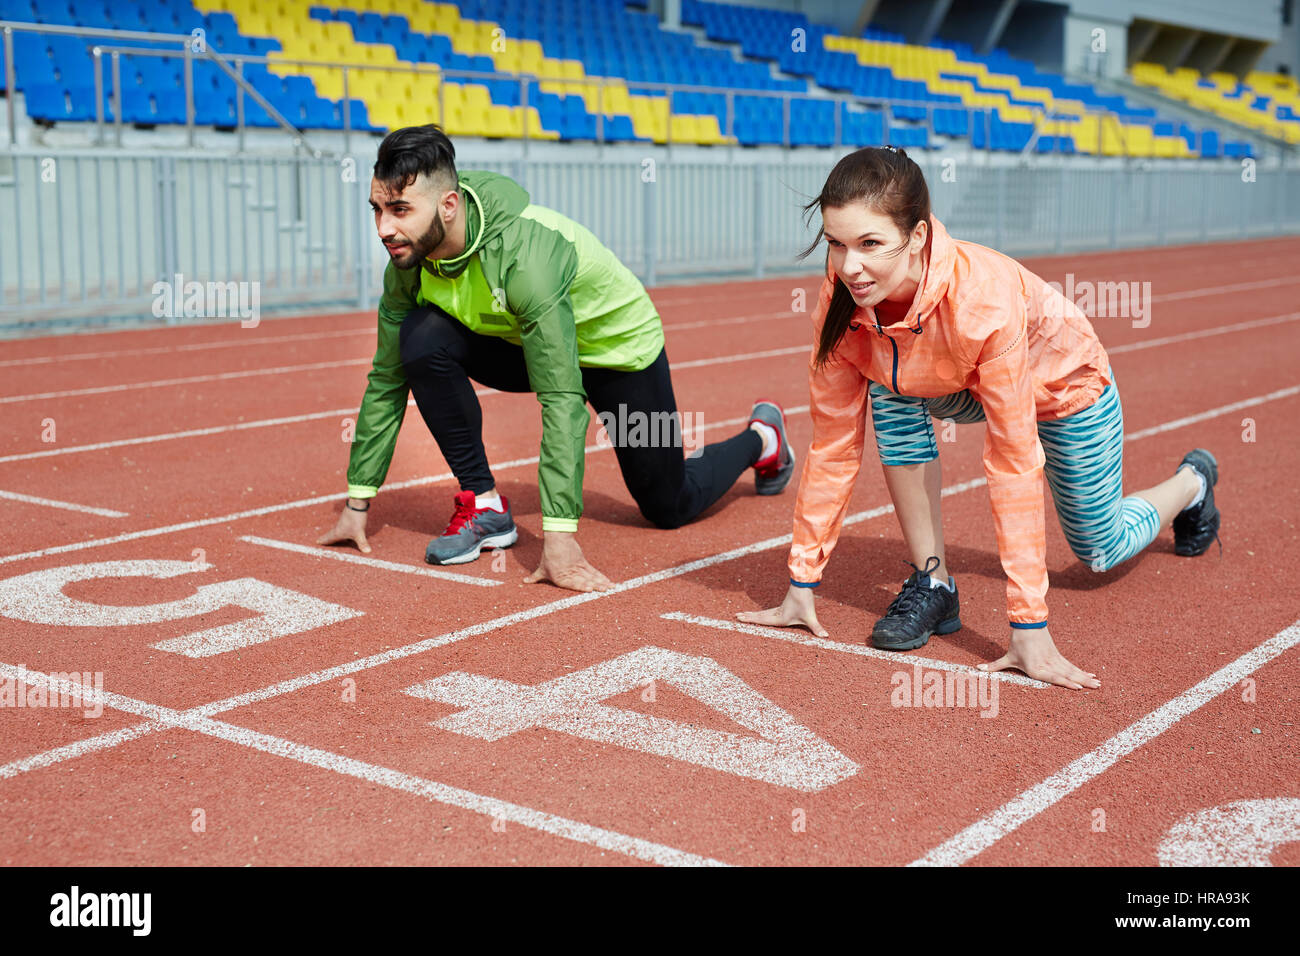 Couple of athletes, man and woman, standing close together on sprint tracks in stadium ready to start running competition Stock Photo